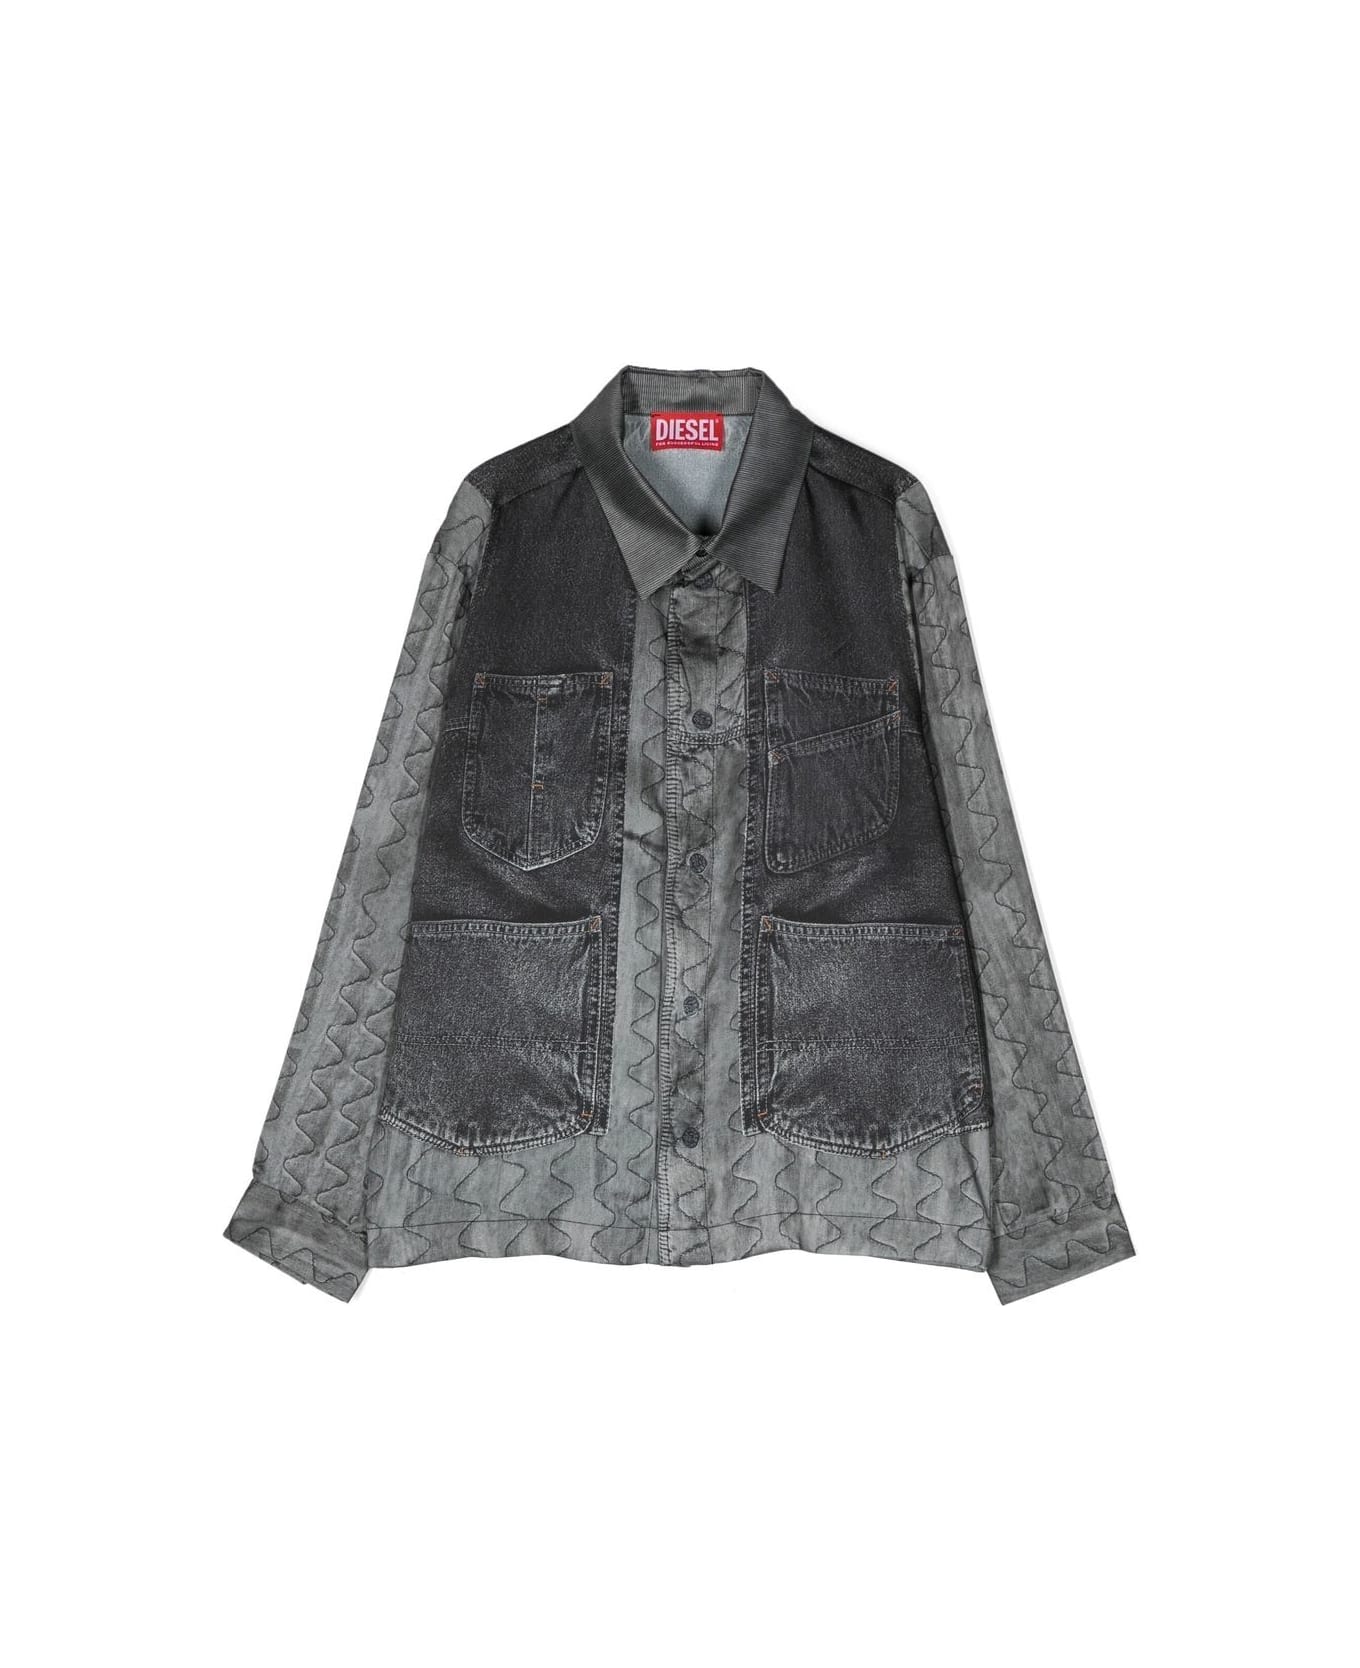 Diesel Shirt With Print - Gray